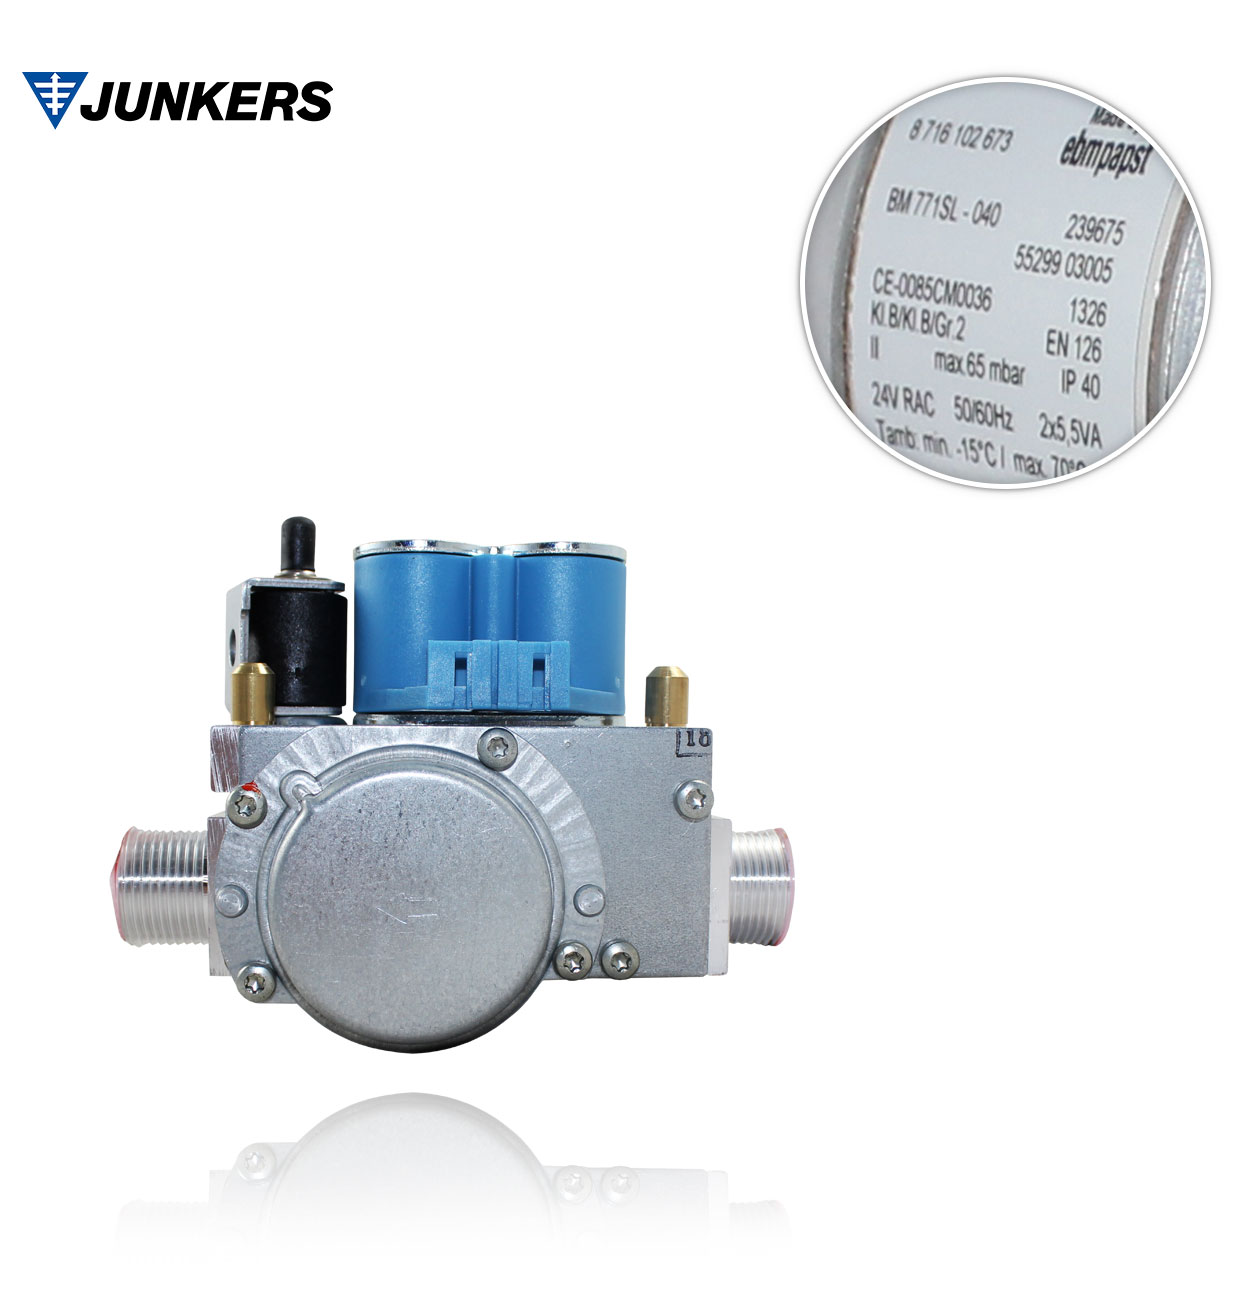 JUNKERS 8716102673 GAS VALVE BODY